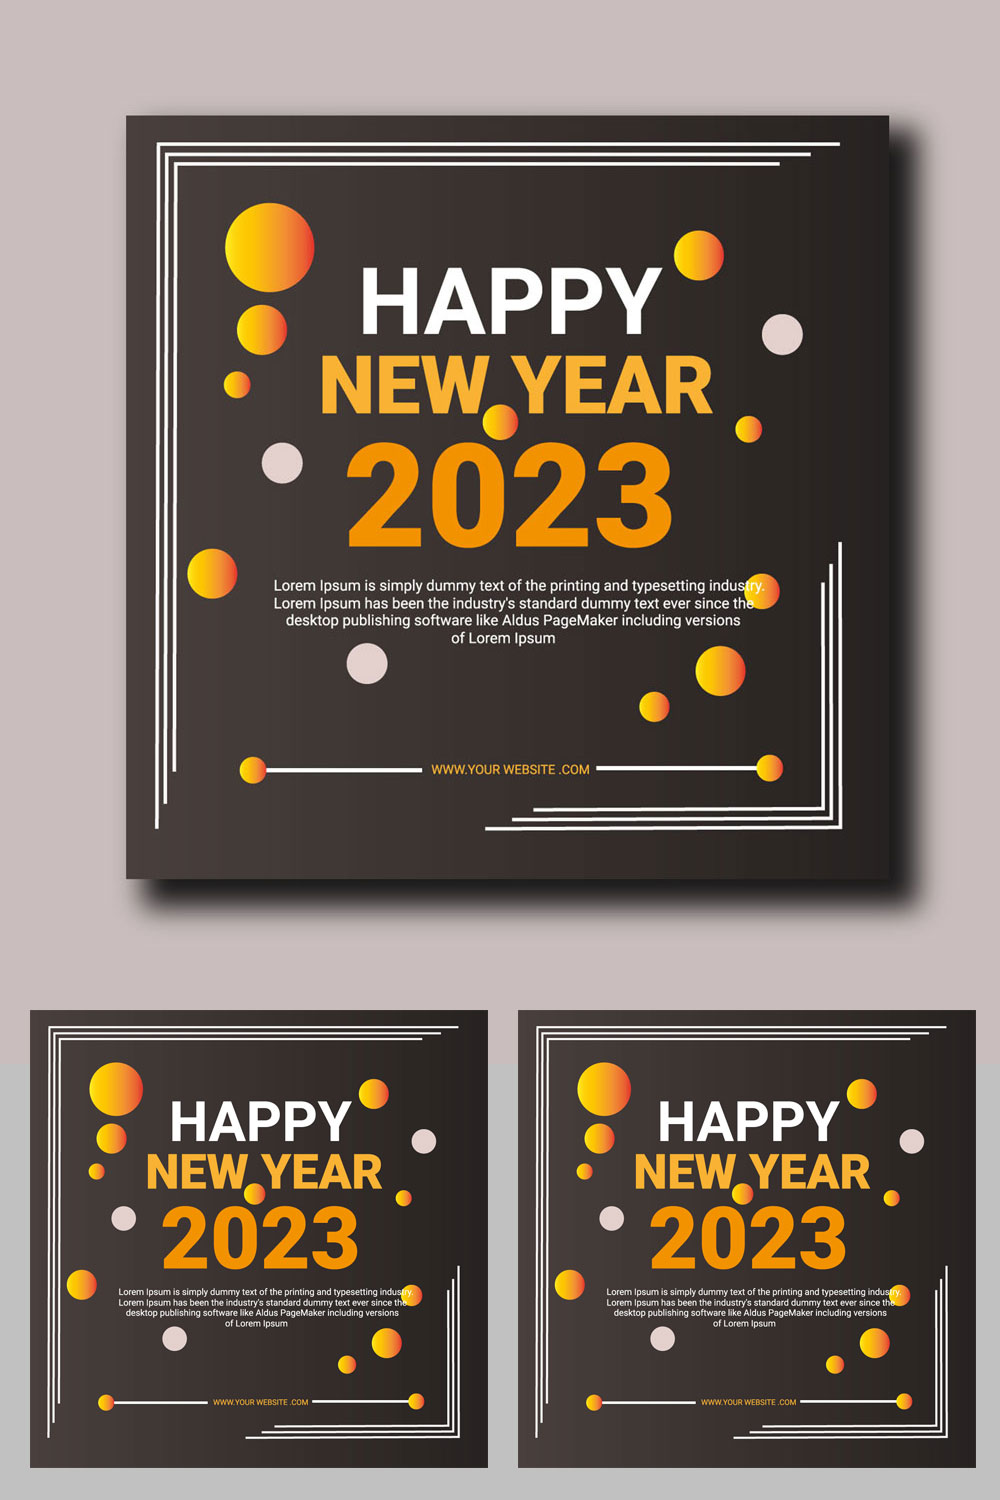 Happy New Year 2023 Social Media Post Template Design Pinterest Collage image.